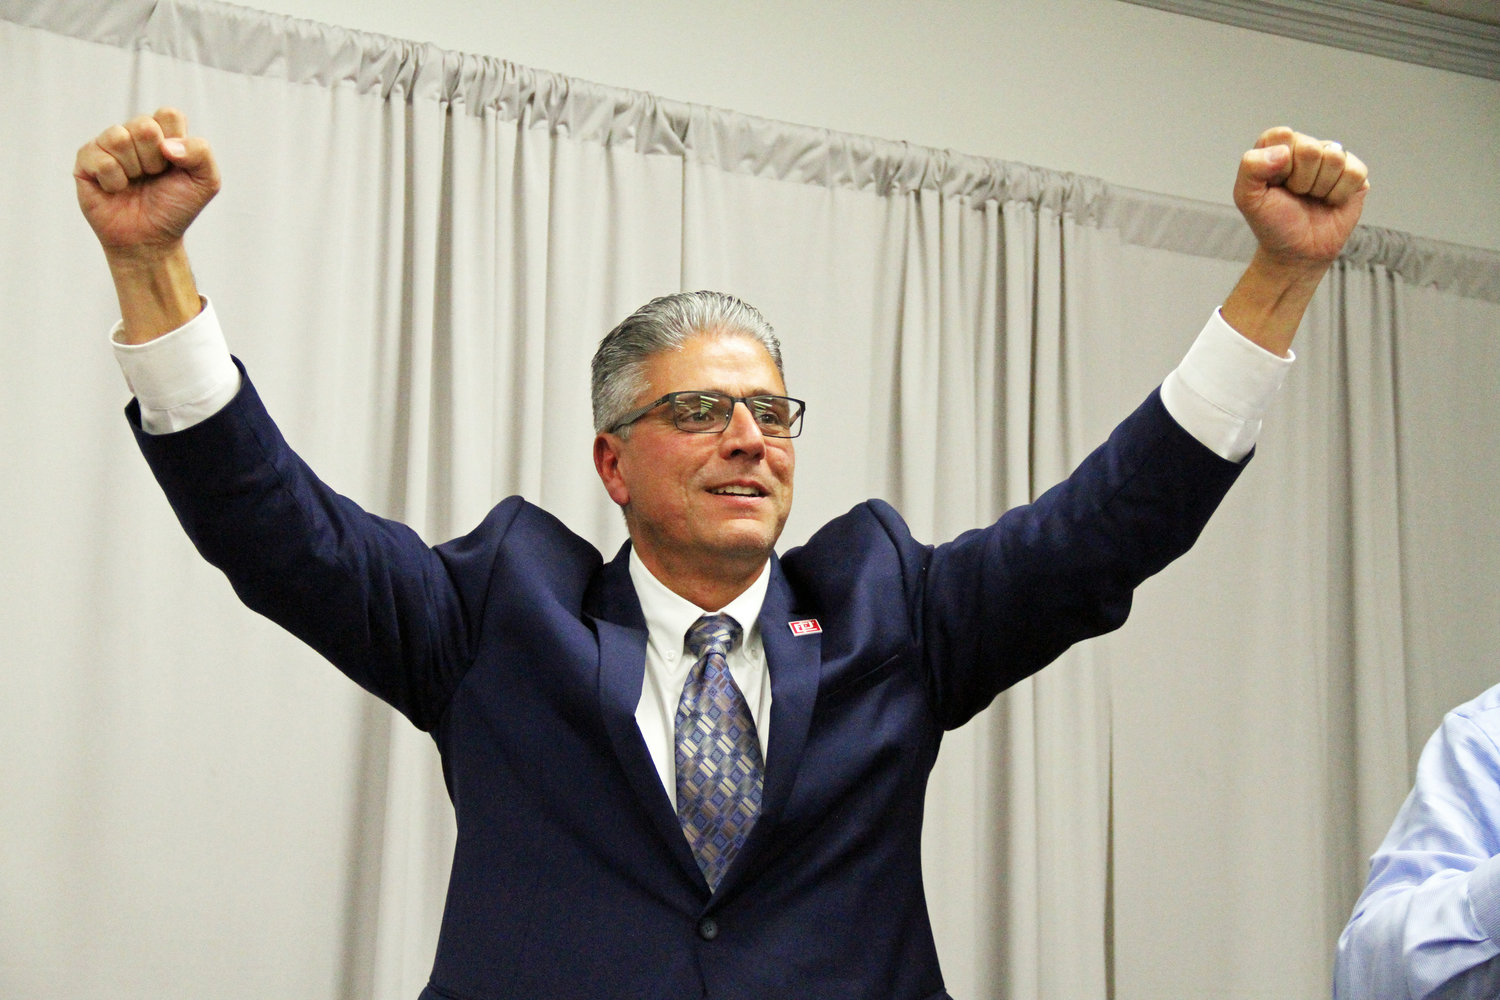 Roberto DaSilva triumphantly responds to the results from the November 6 ballot, which saw him defeat James Russo to become East Providence's first elected mayor.